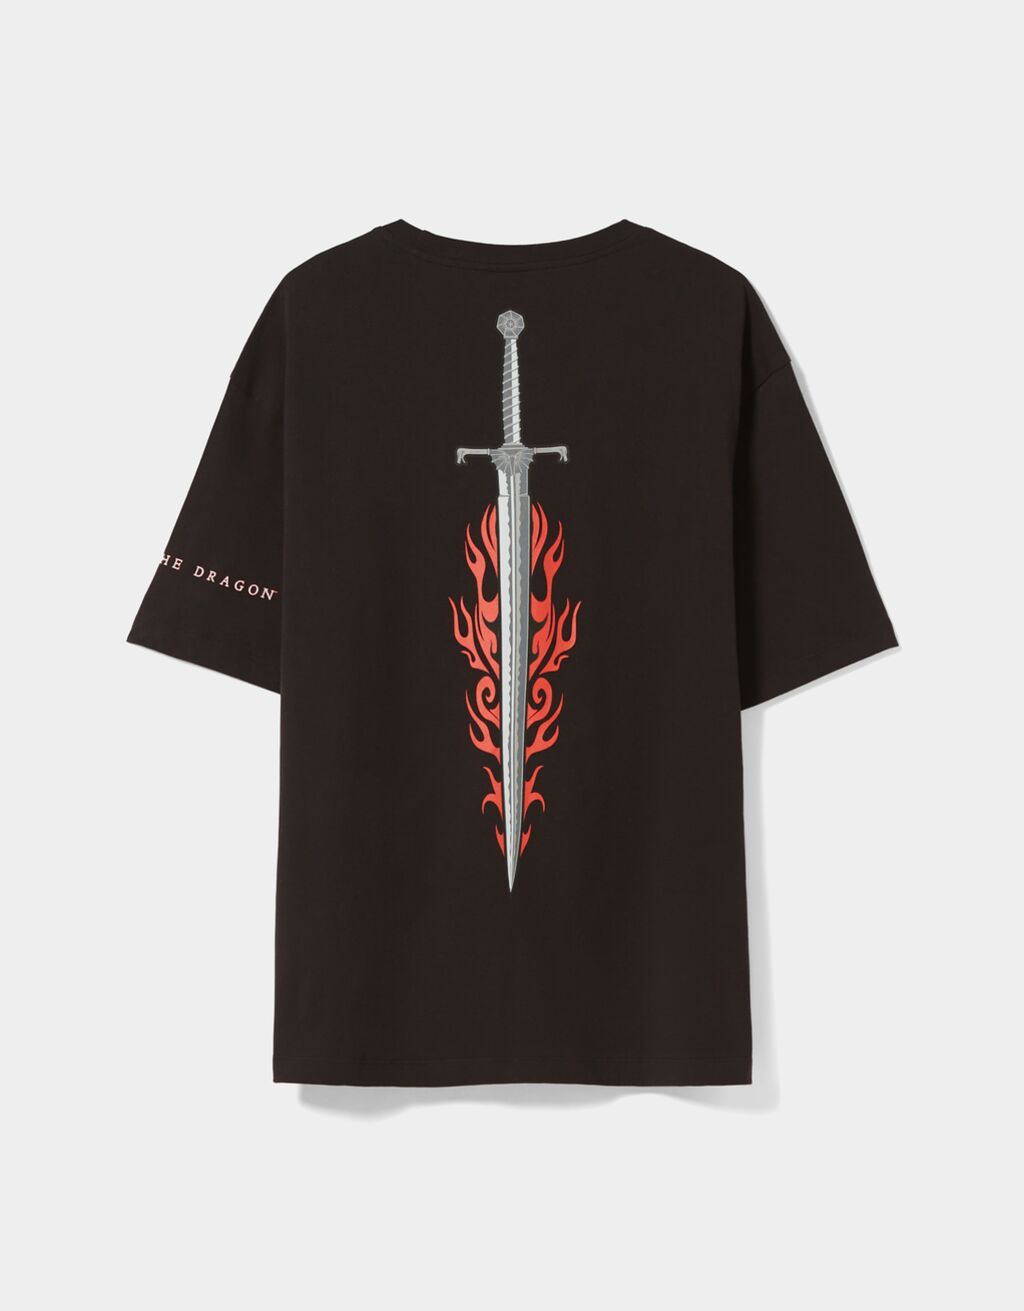 House of Dragons oversize boxy fit T-shirt